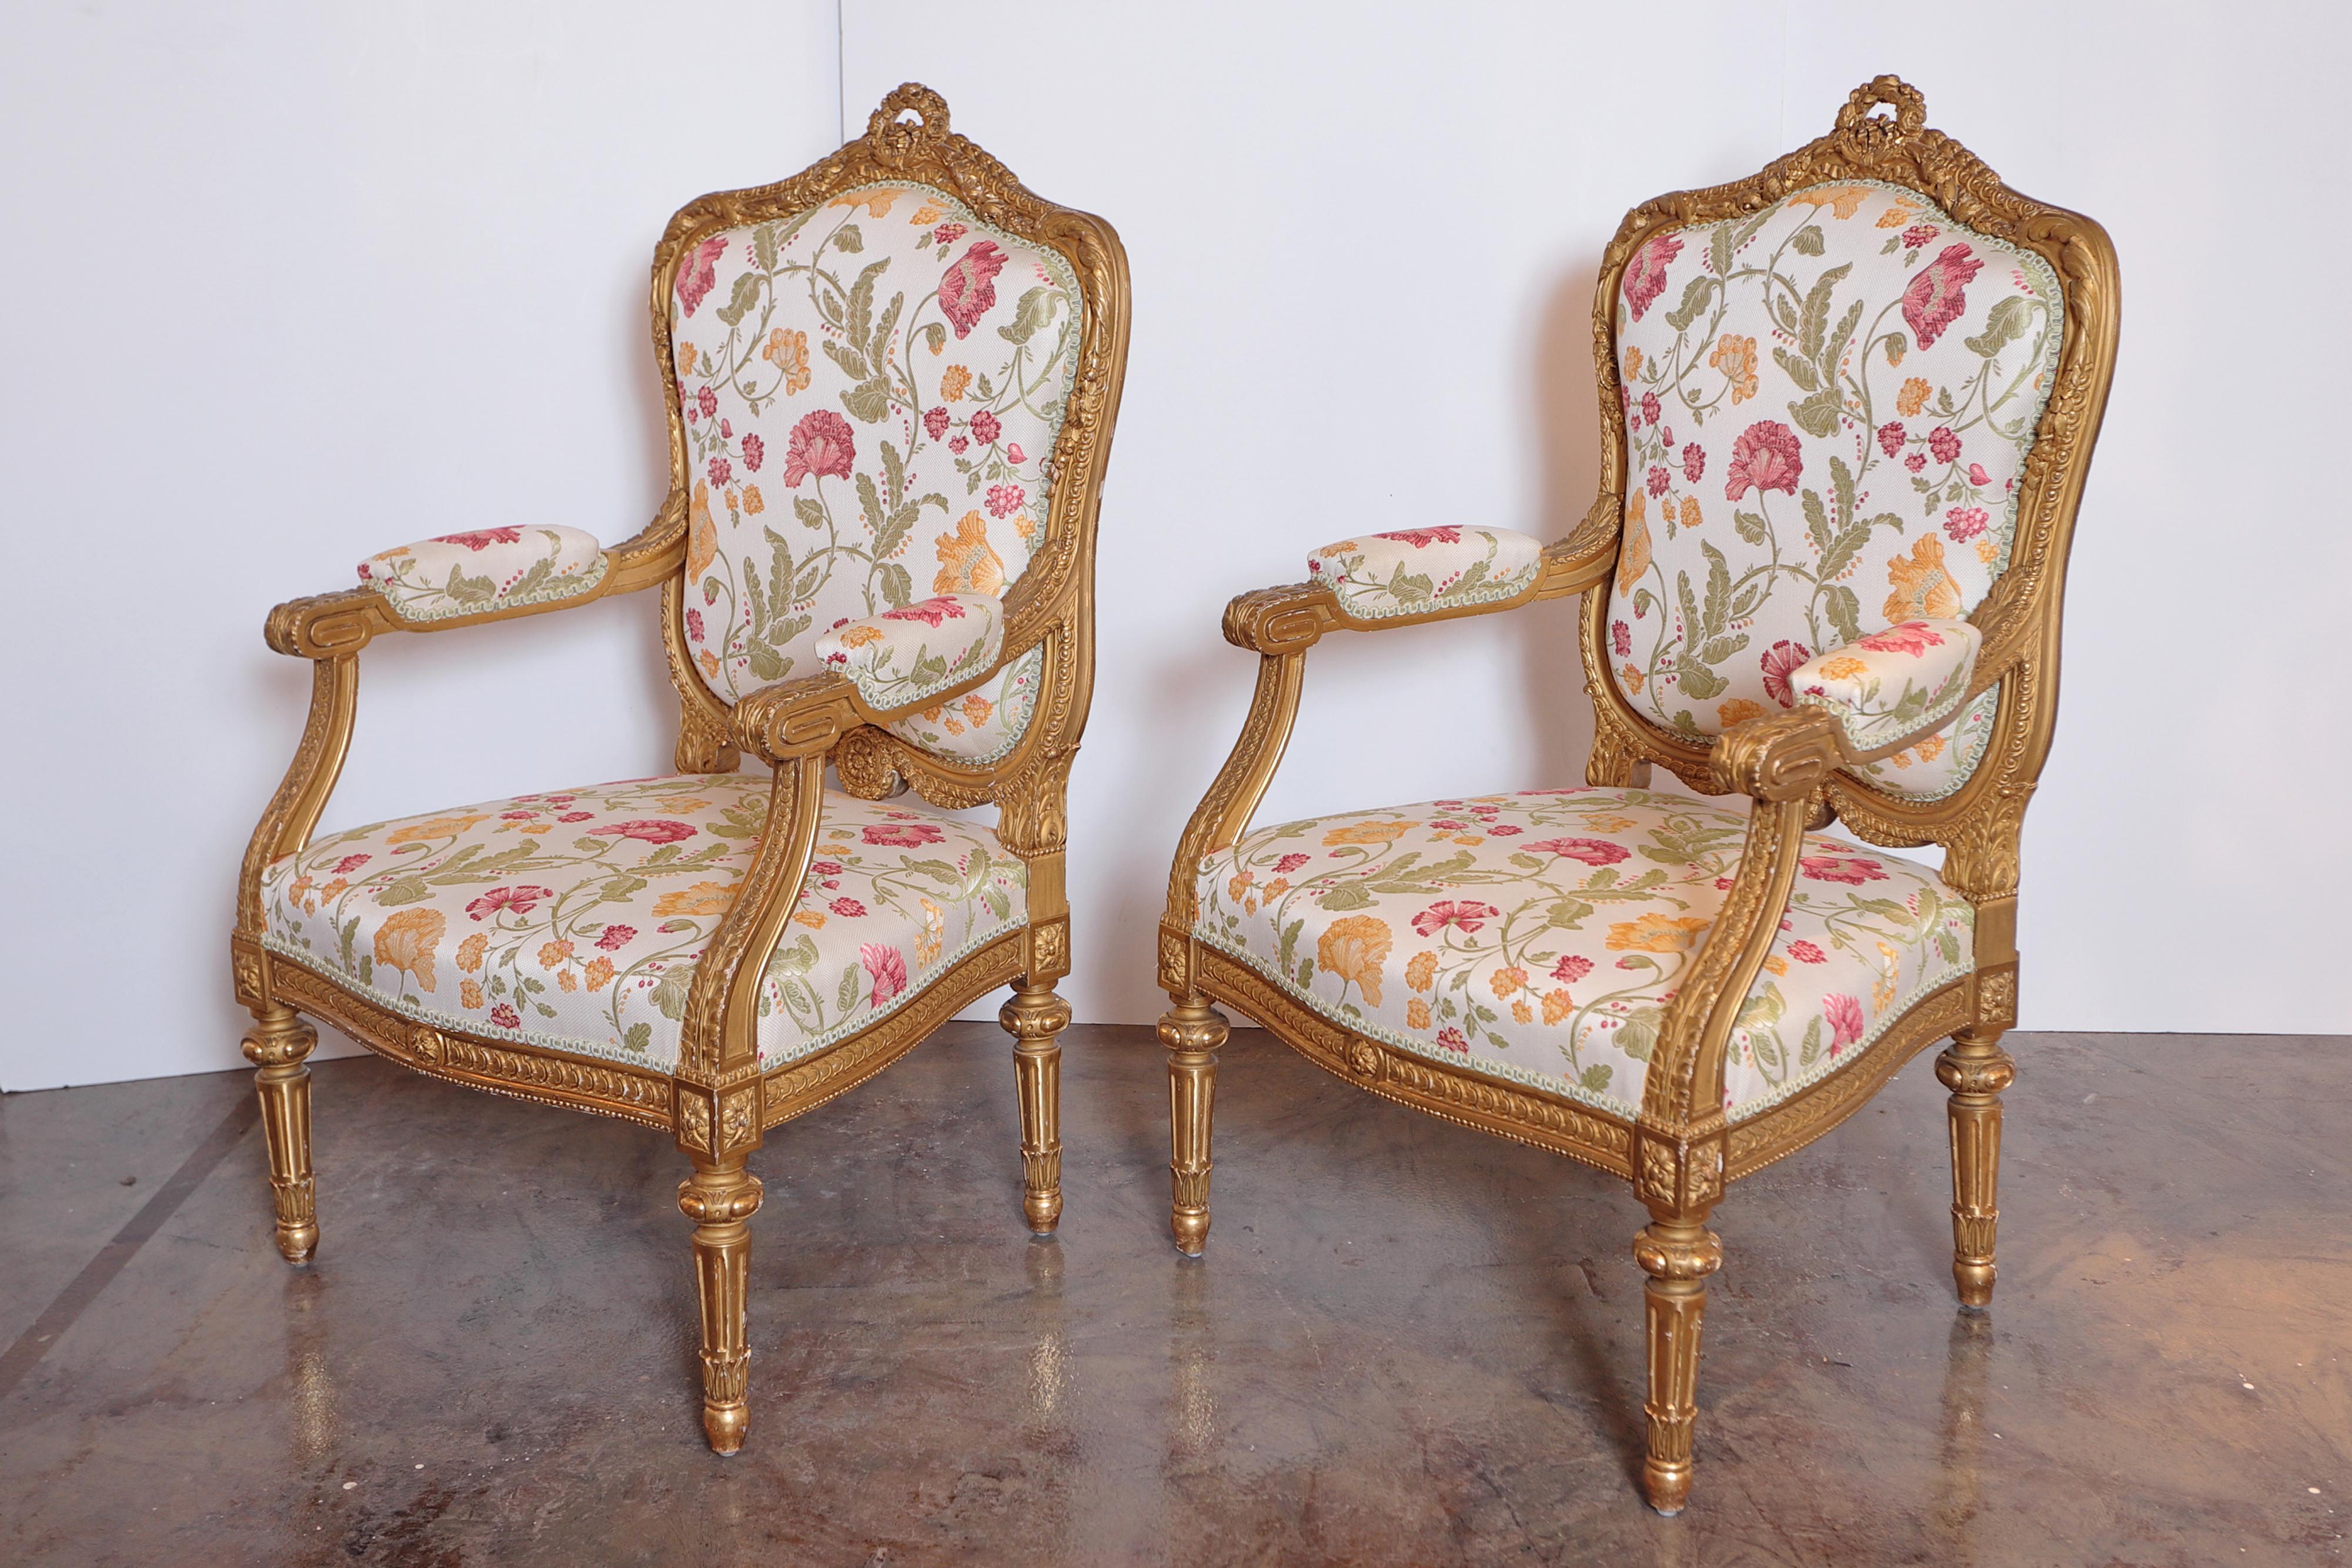 A pair of early 20th century French gilt carved fauteuils. Fine quality gilt carving. Covered in a Scalamandre fabric.